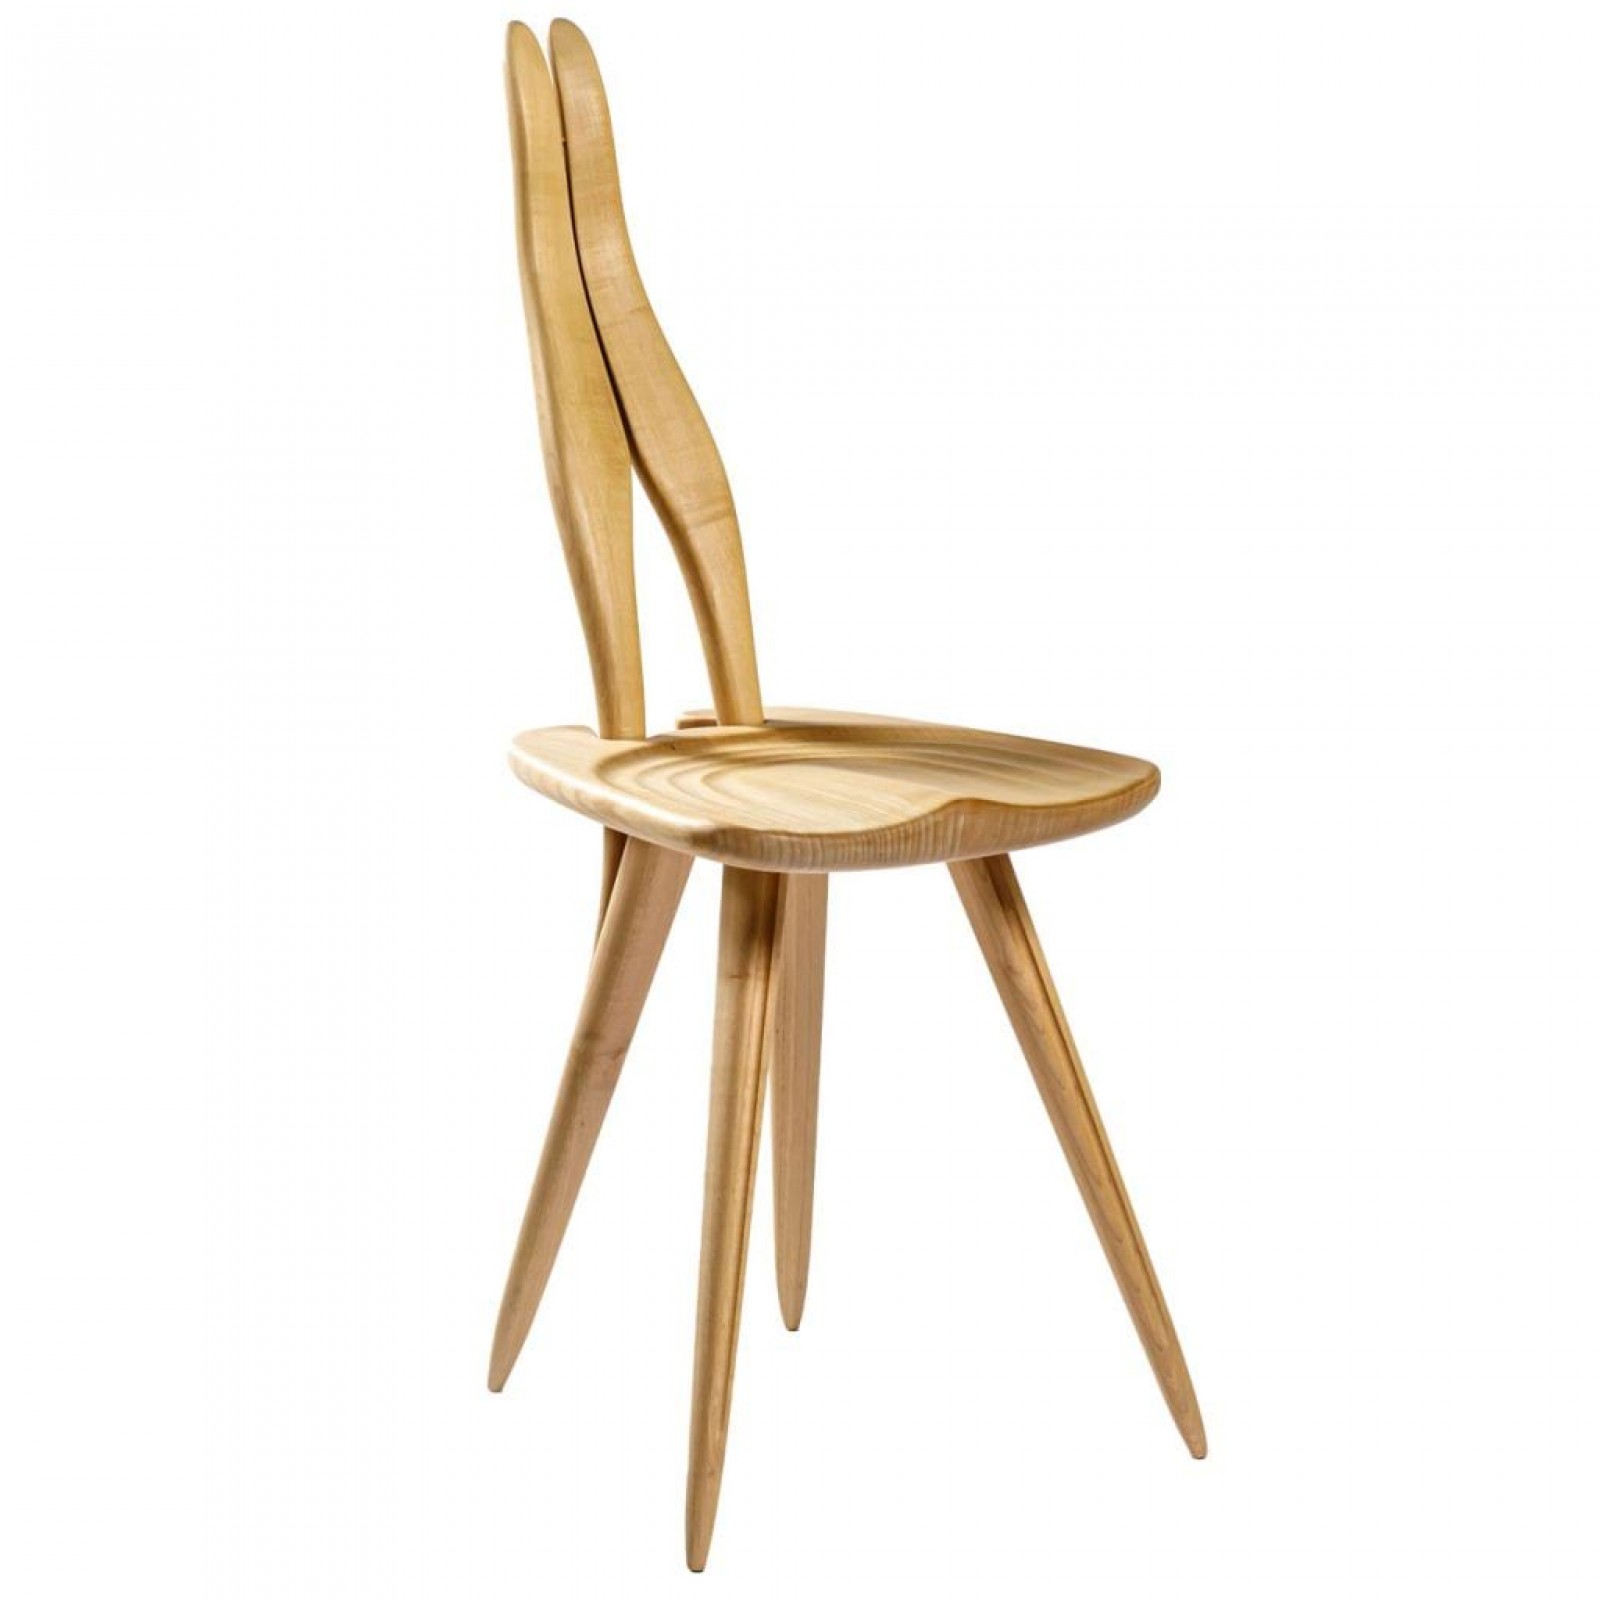 Fenis Dining Chair (Natural Wood) - Zanotta